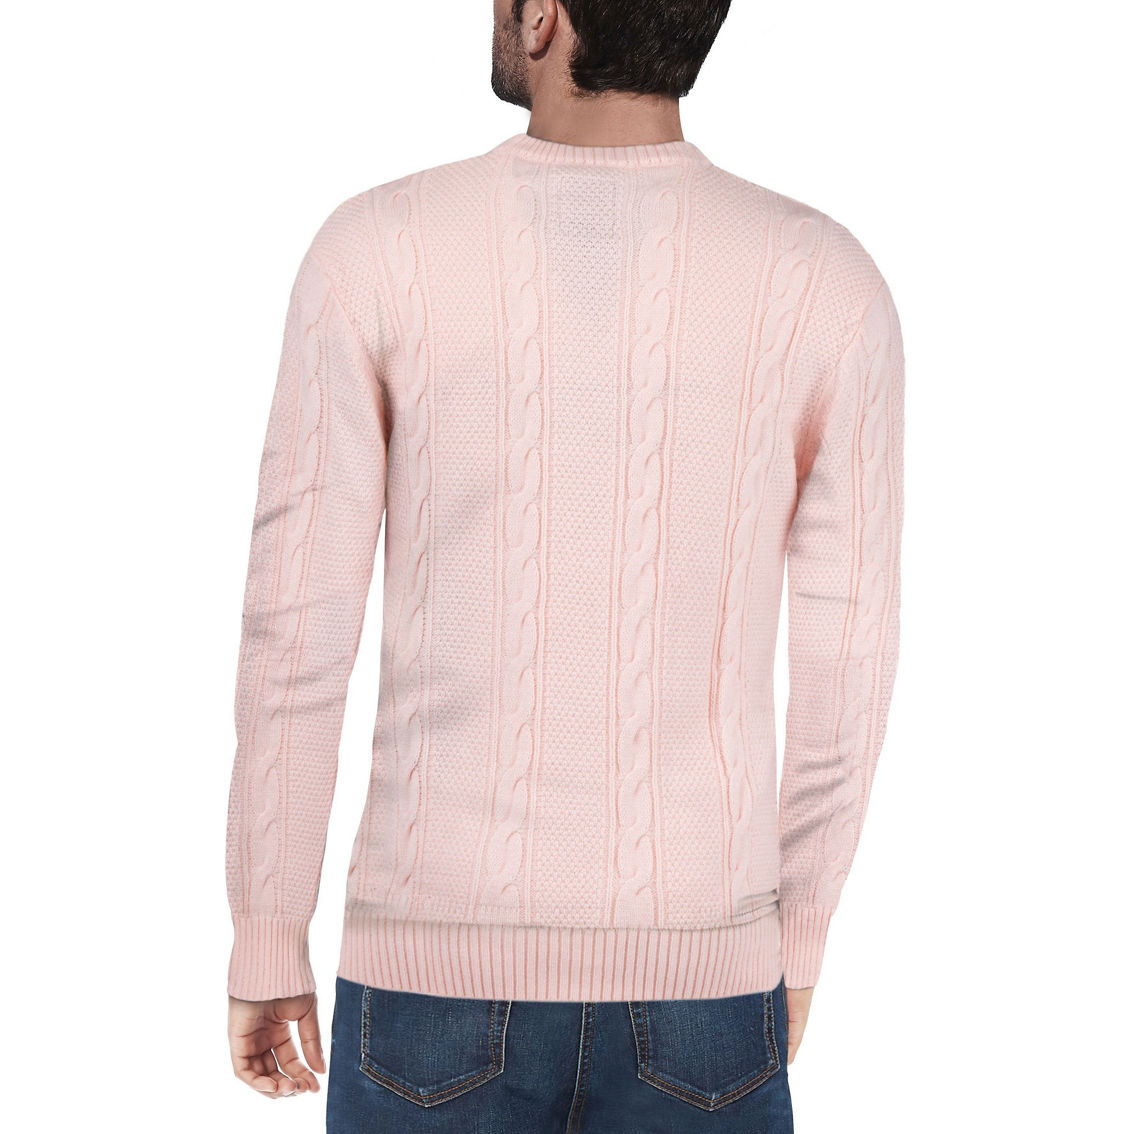 Men's Cable Knit Crewneck Pullover Sweater - Image 2 of 3